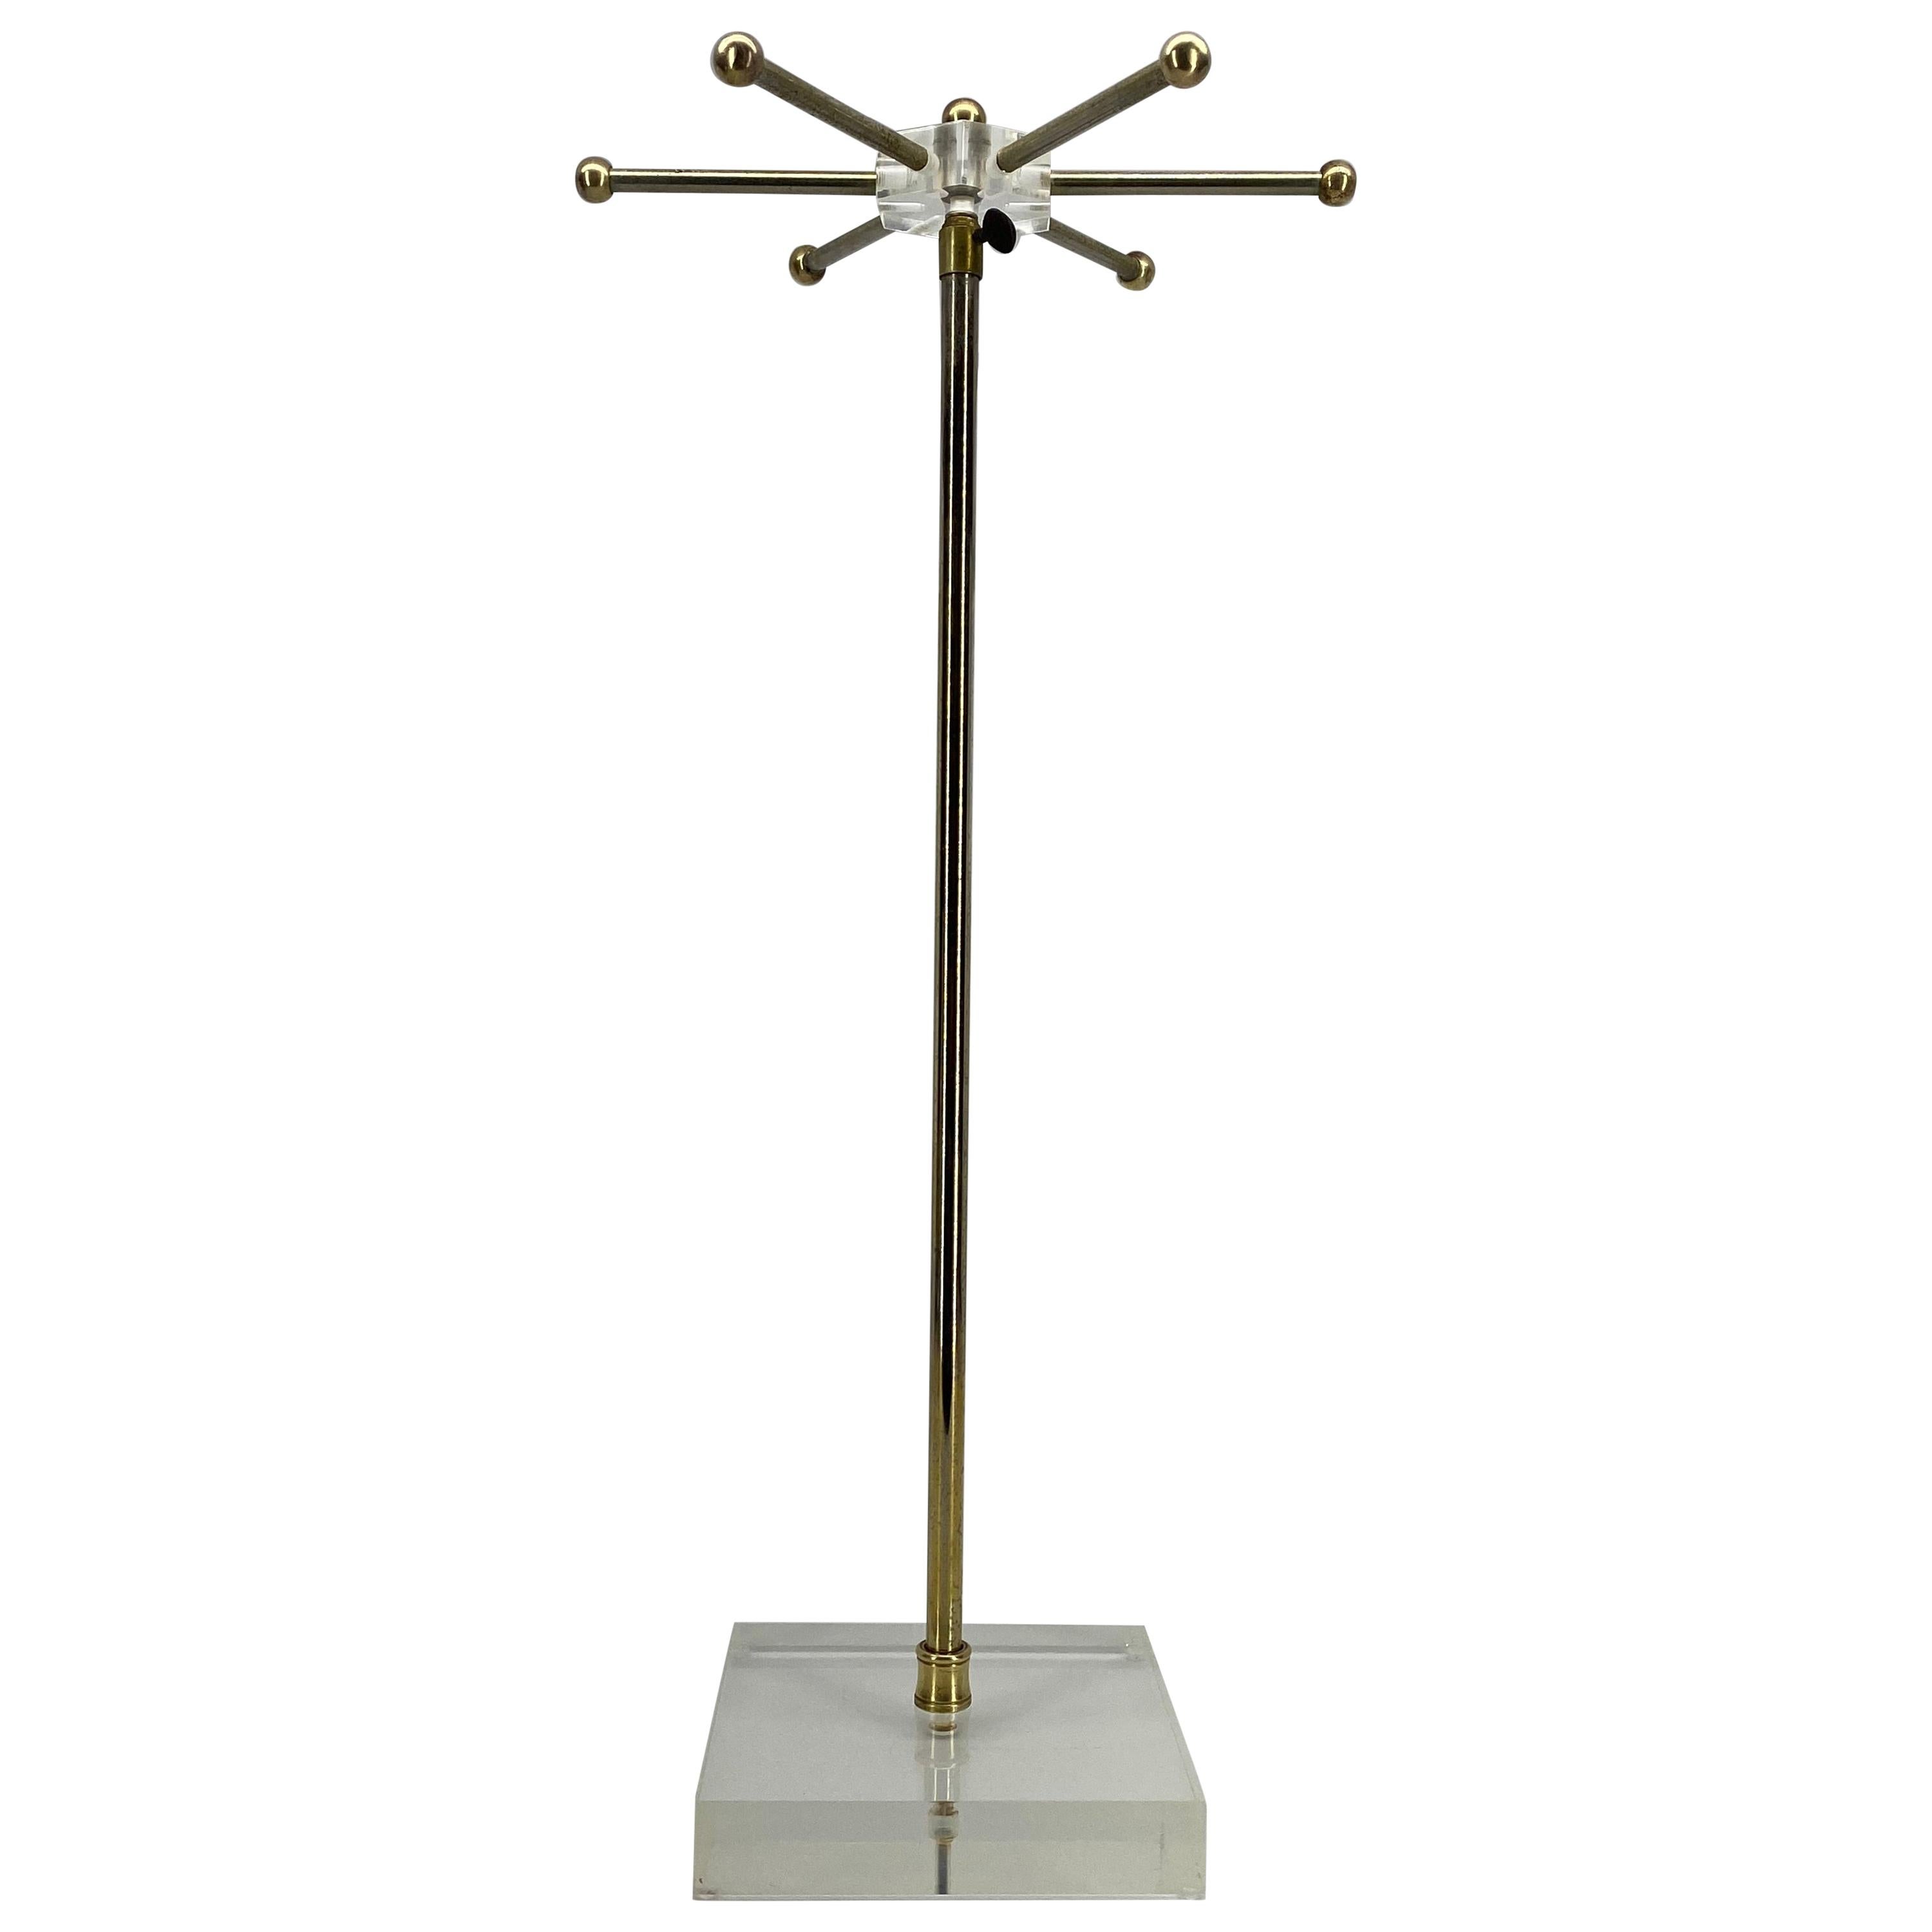 Mid-Century Modern Lucite and Brass Tie And Jewelry Stand